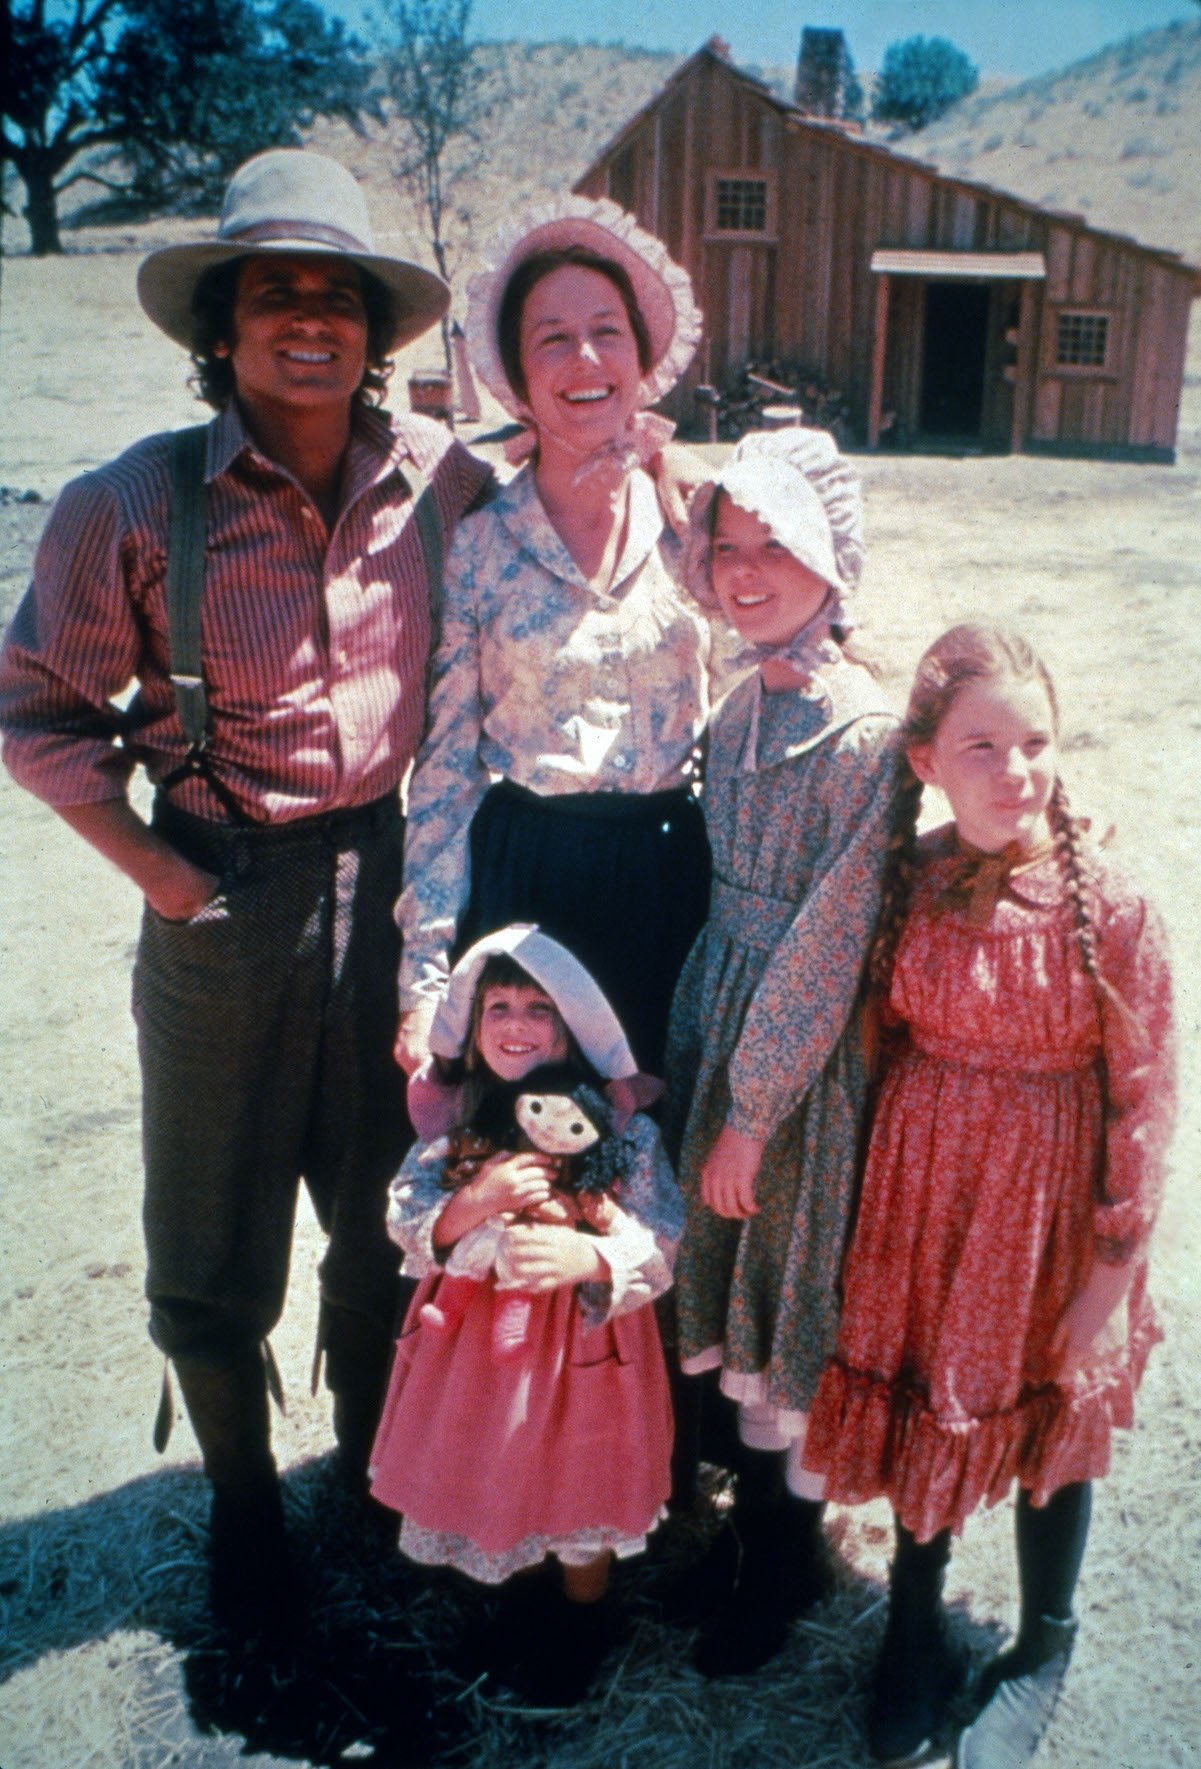 The Ingalls family